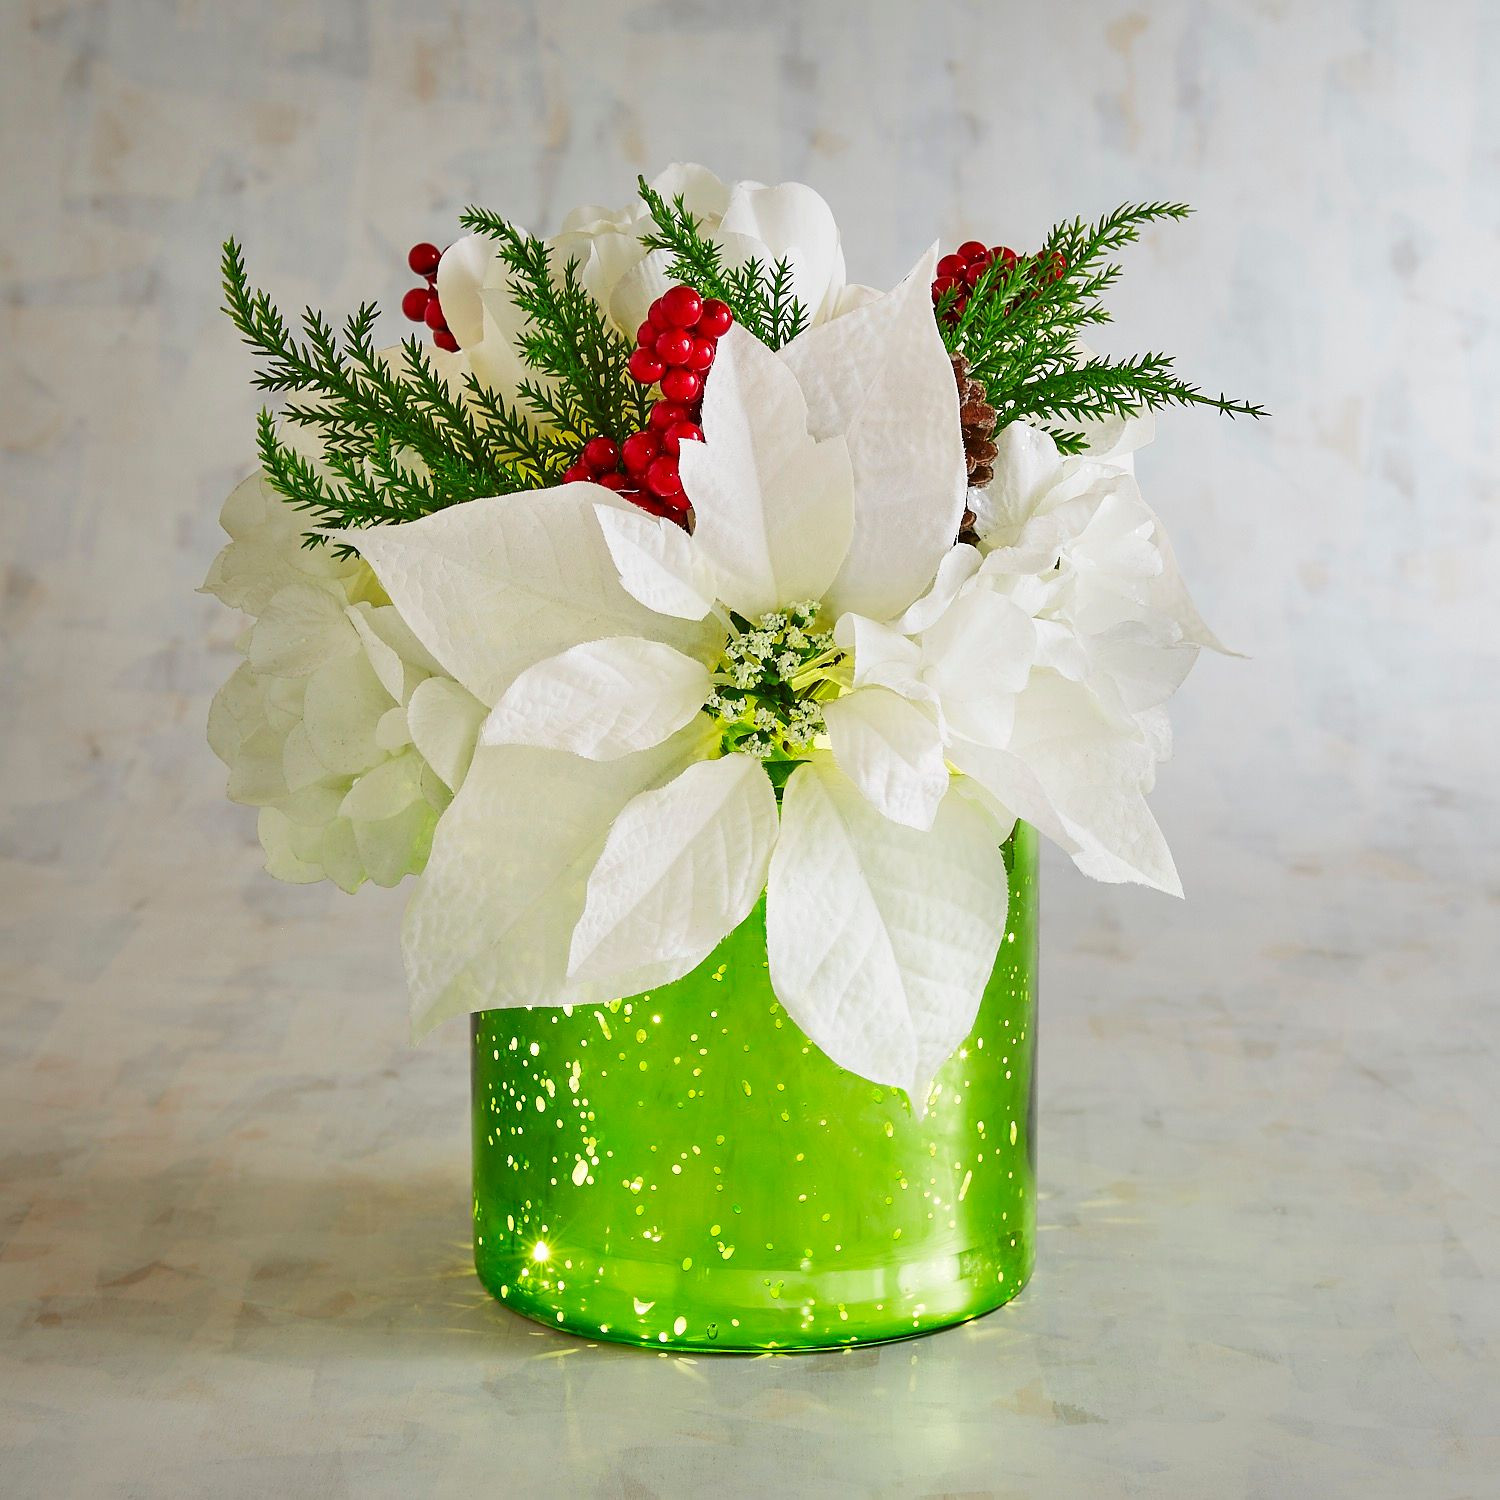 24 Stylish Pier 1 Flower Vases 2022 free download pier 1 flower vases of make a statement pier 1 imports within prearranged flower centerpiece prearranged flower centerpiece with leds